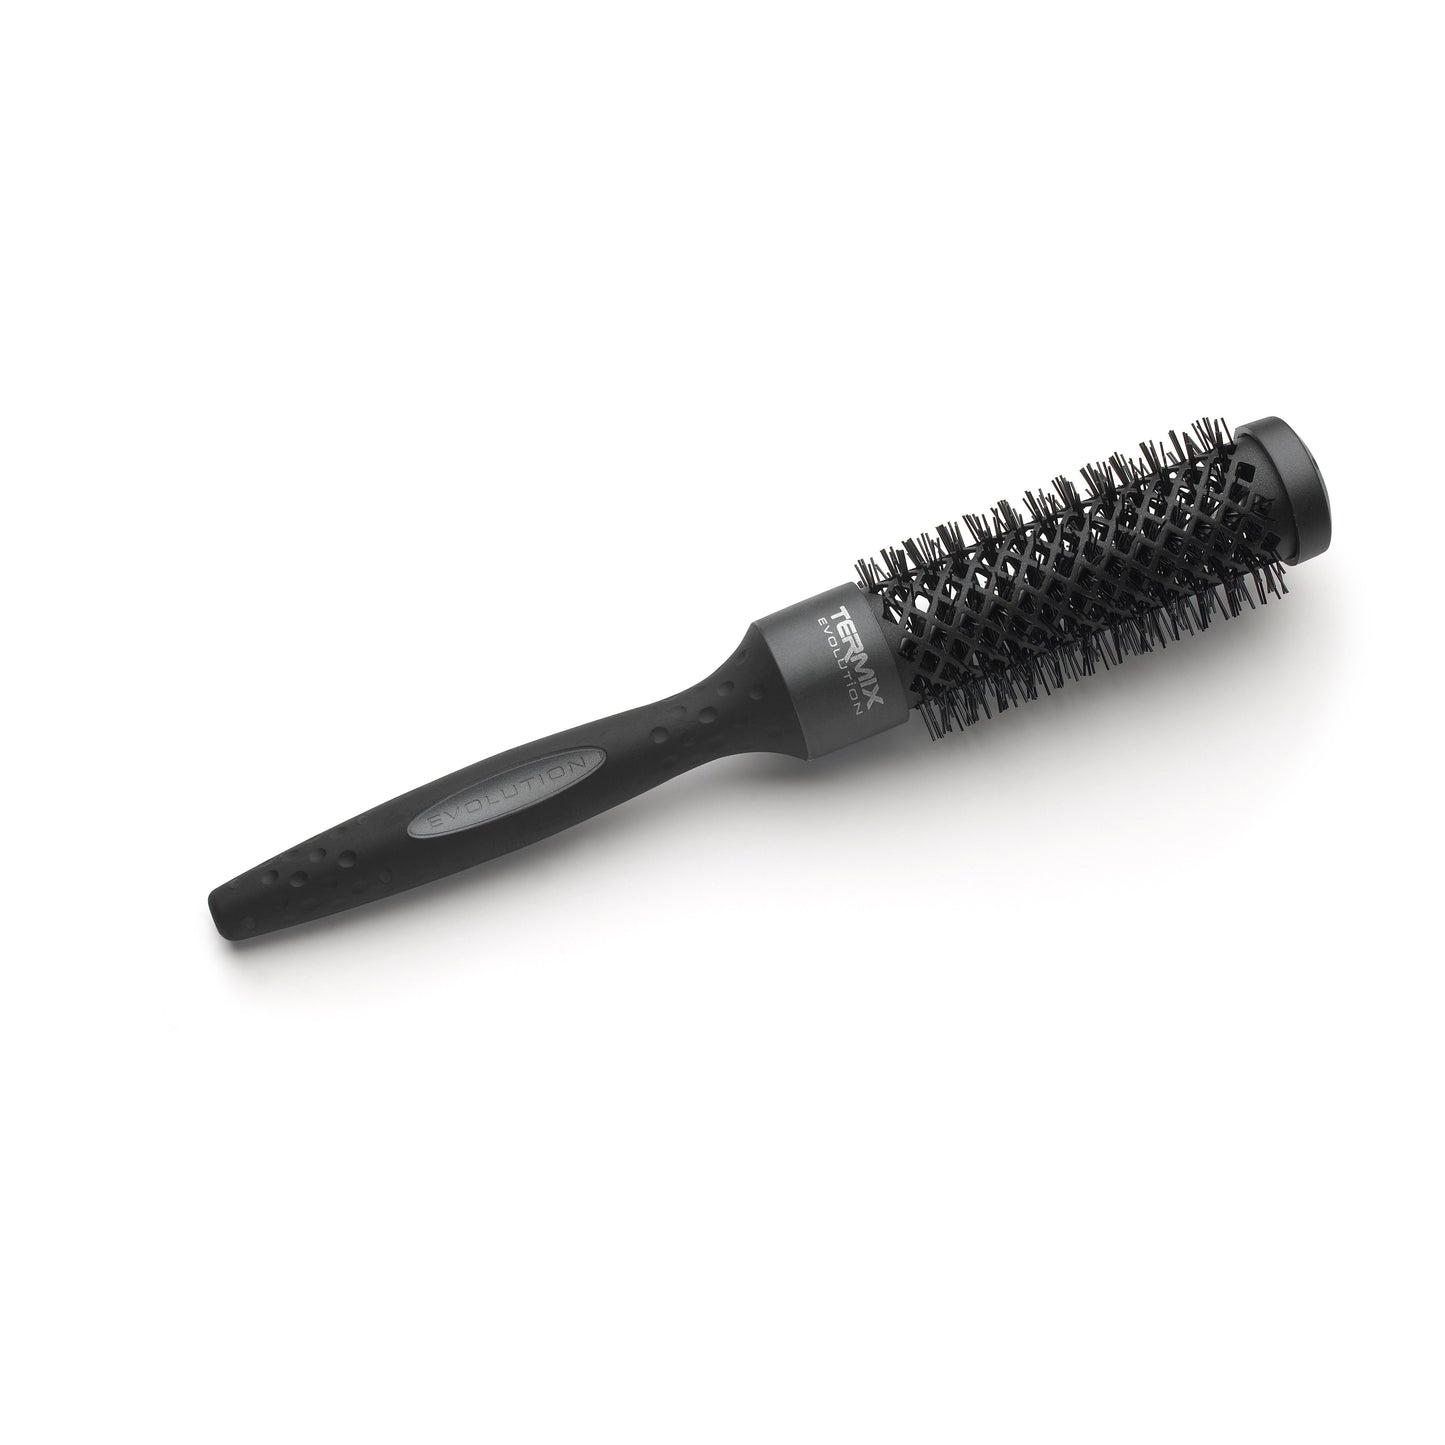 Termix Evolution Styling Brush 28mm PLUS for Thick Hair